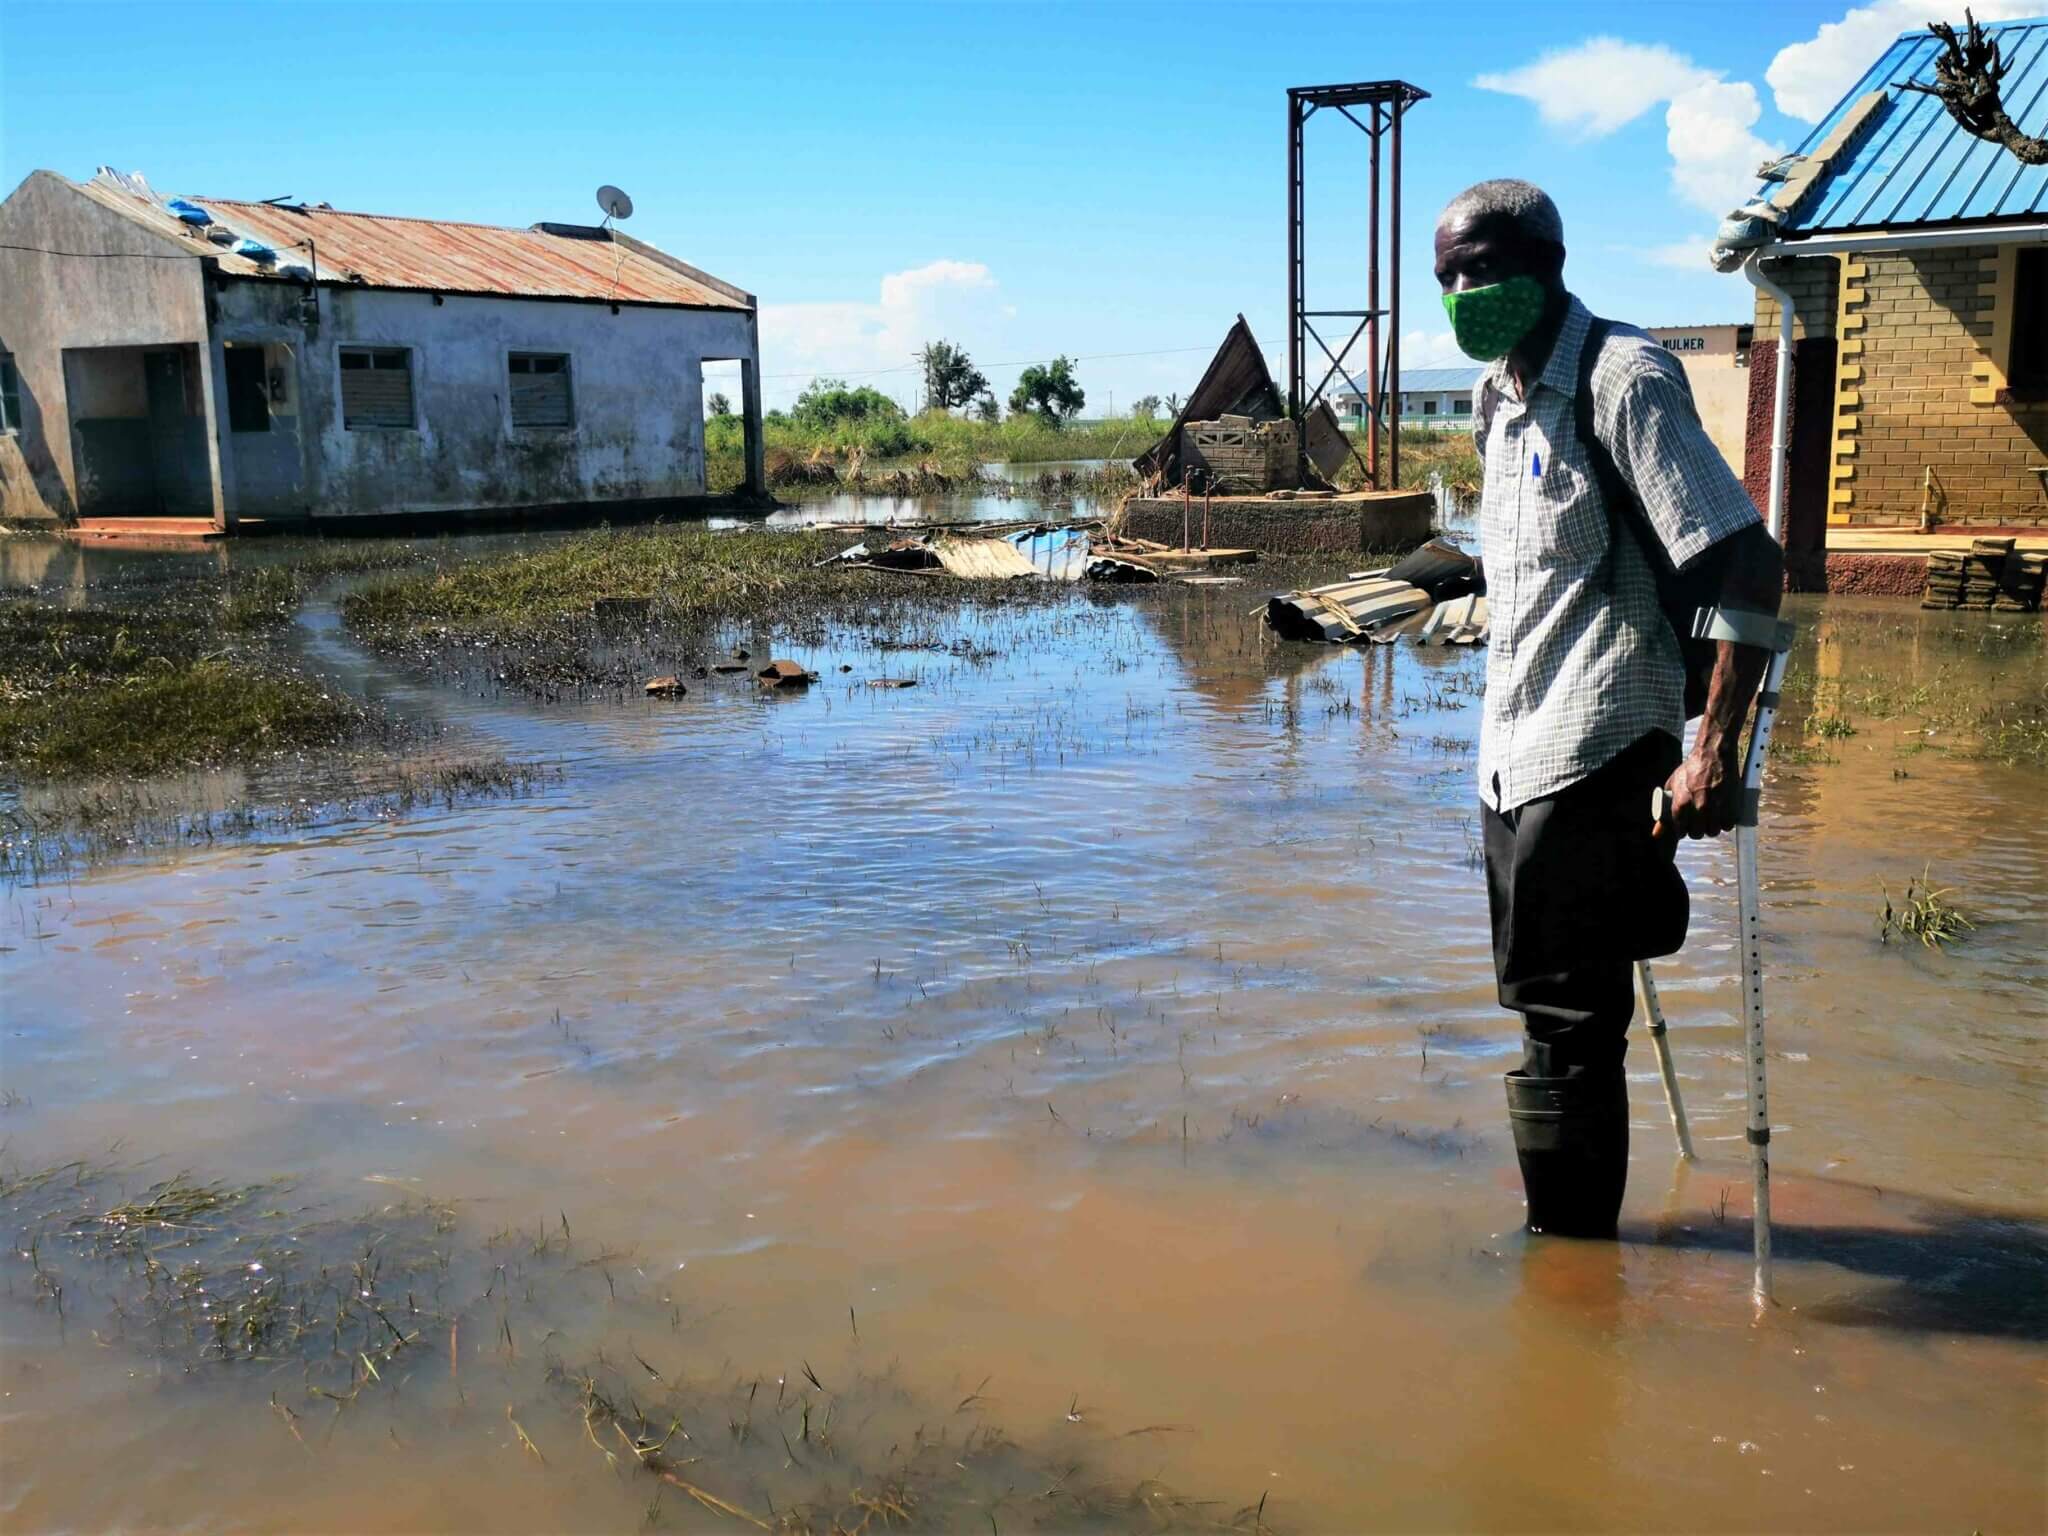 Luis Faquira, the Sofala district representative of FAMOD stands in flooded water in the aftermath of Cyclone Idai.